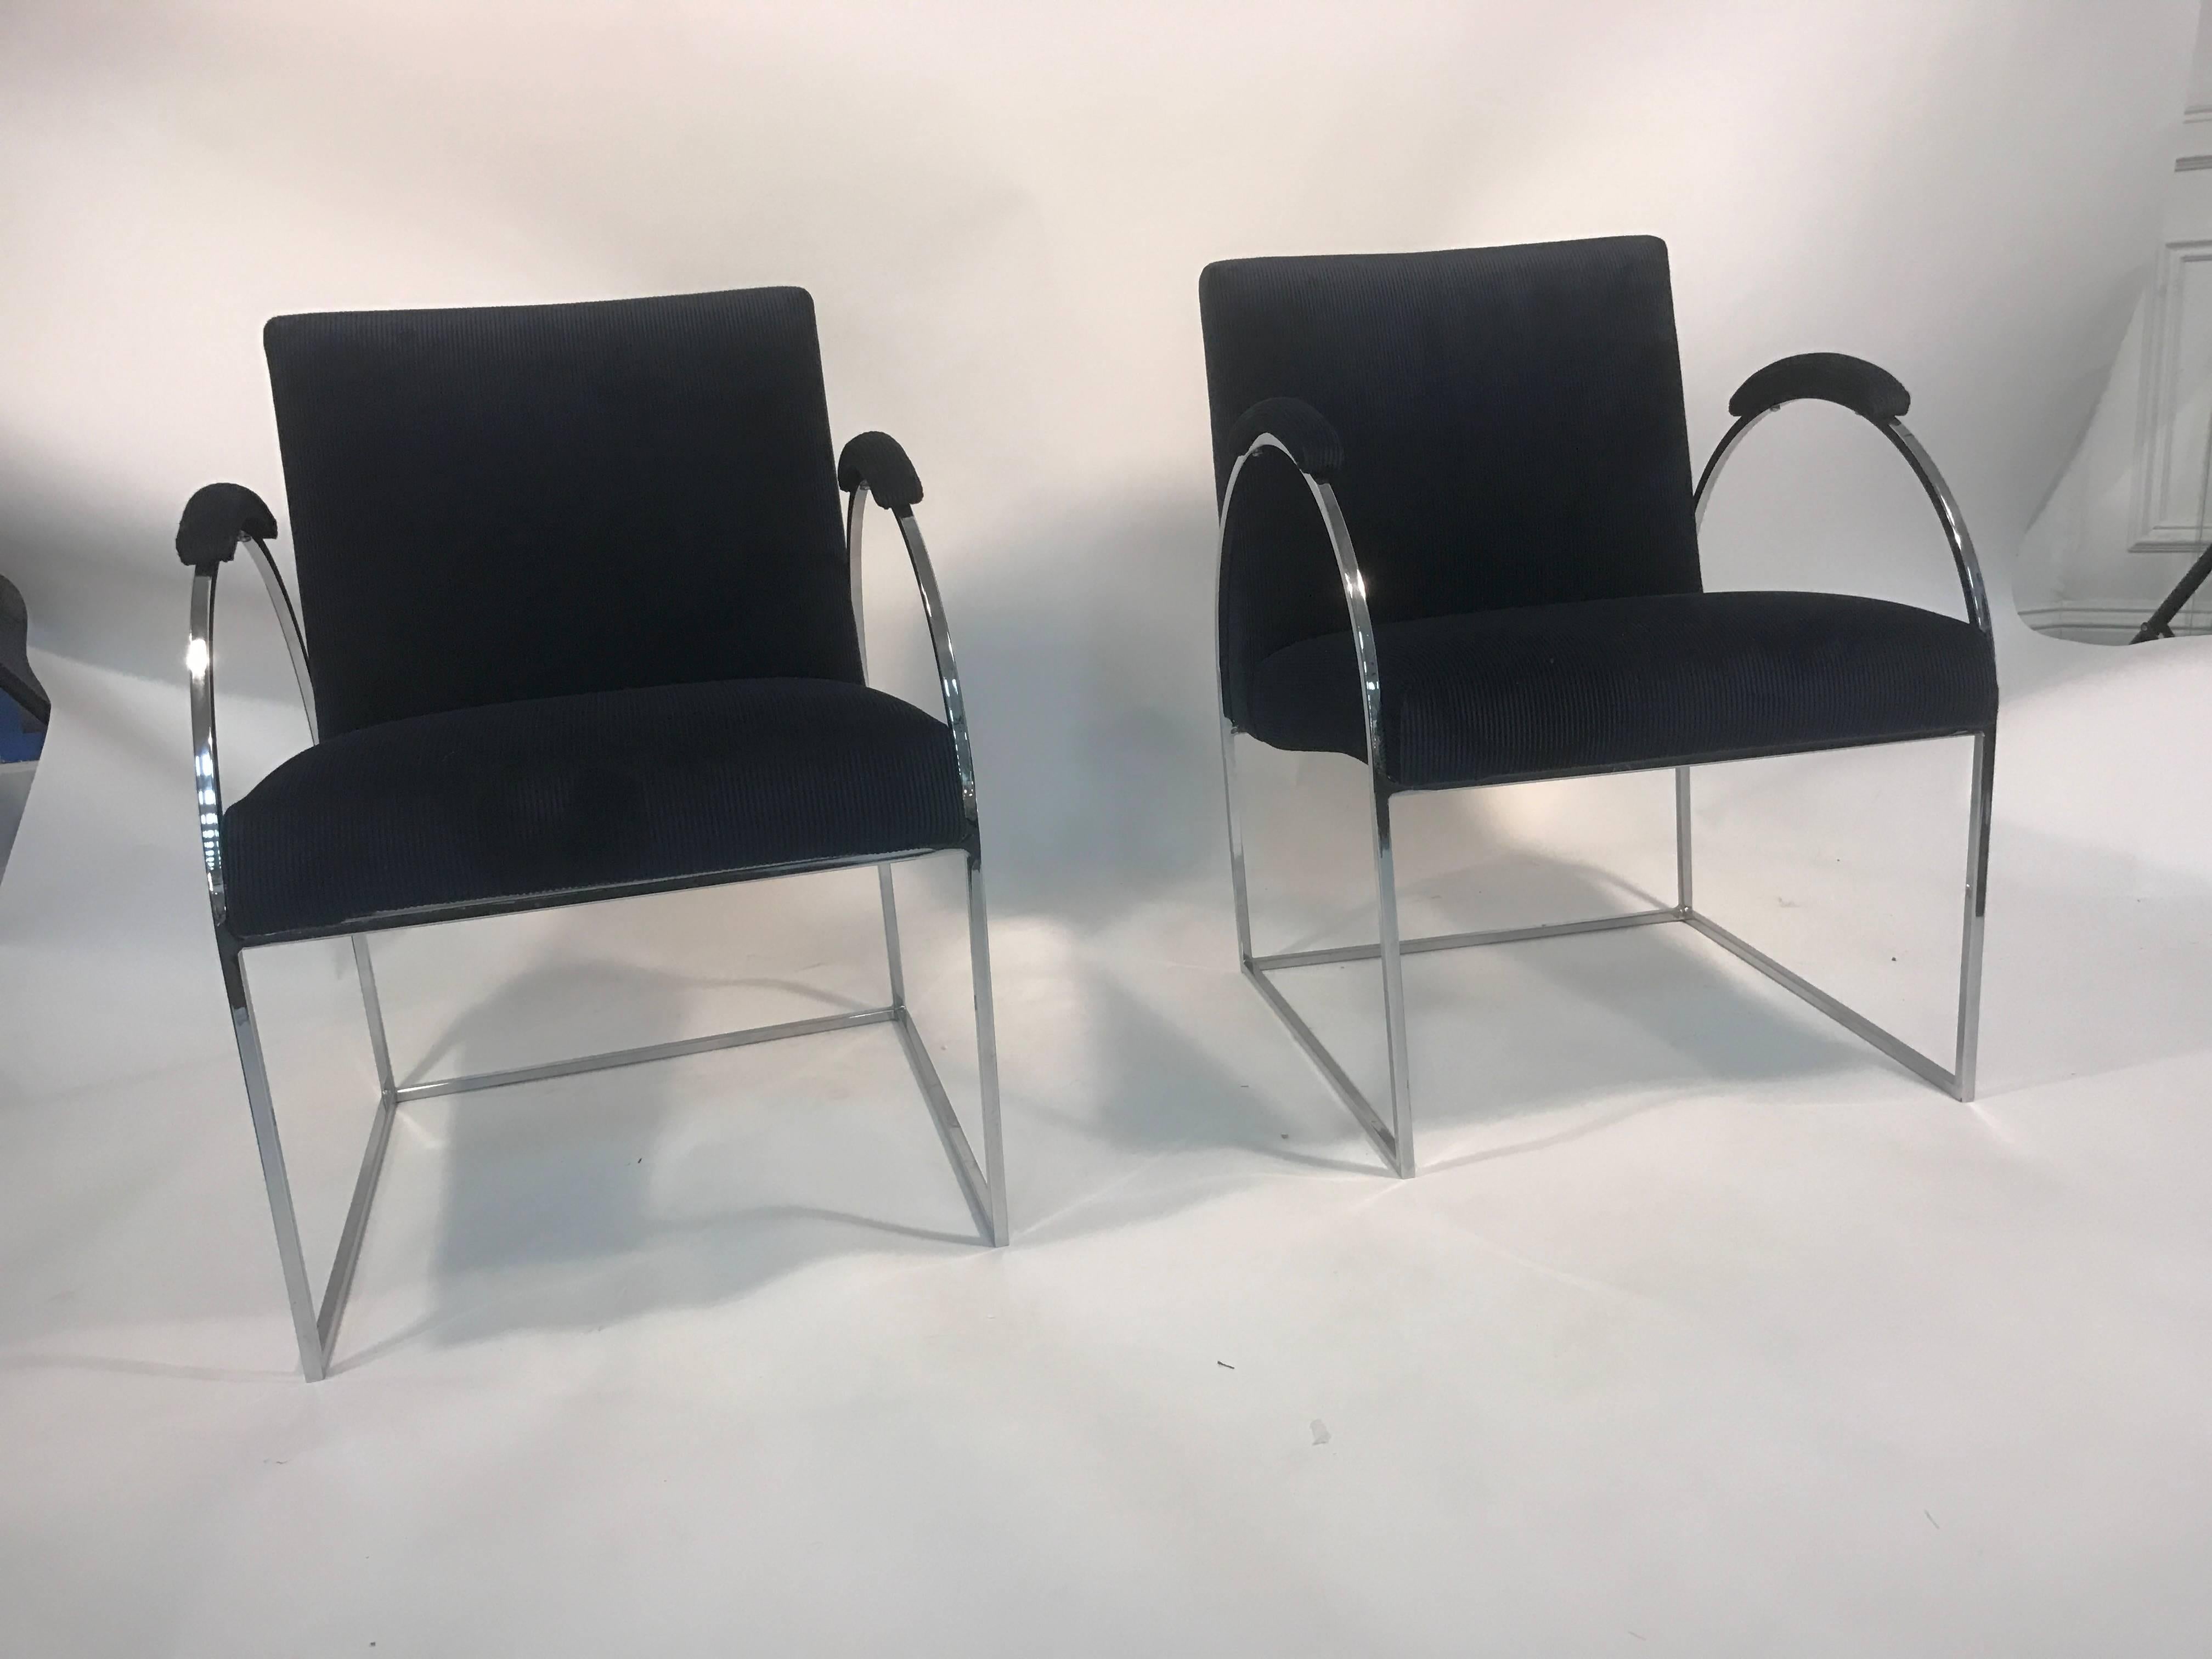 A fabulous pair of chrome chairs with beautifully designed curved arms, and rich velvet fabric by Milo Baughman, circa 1970s. Great condition.